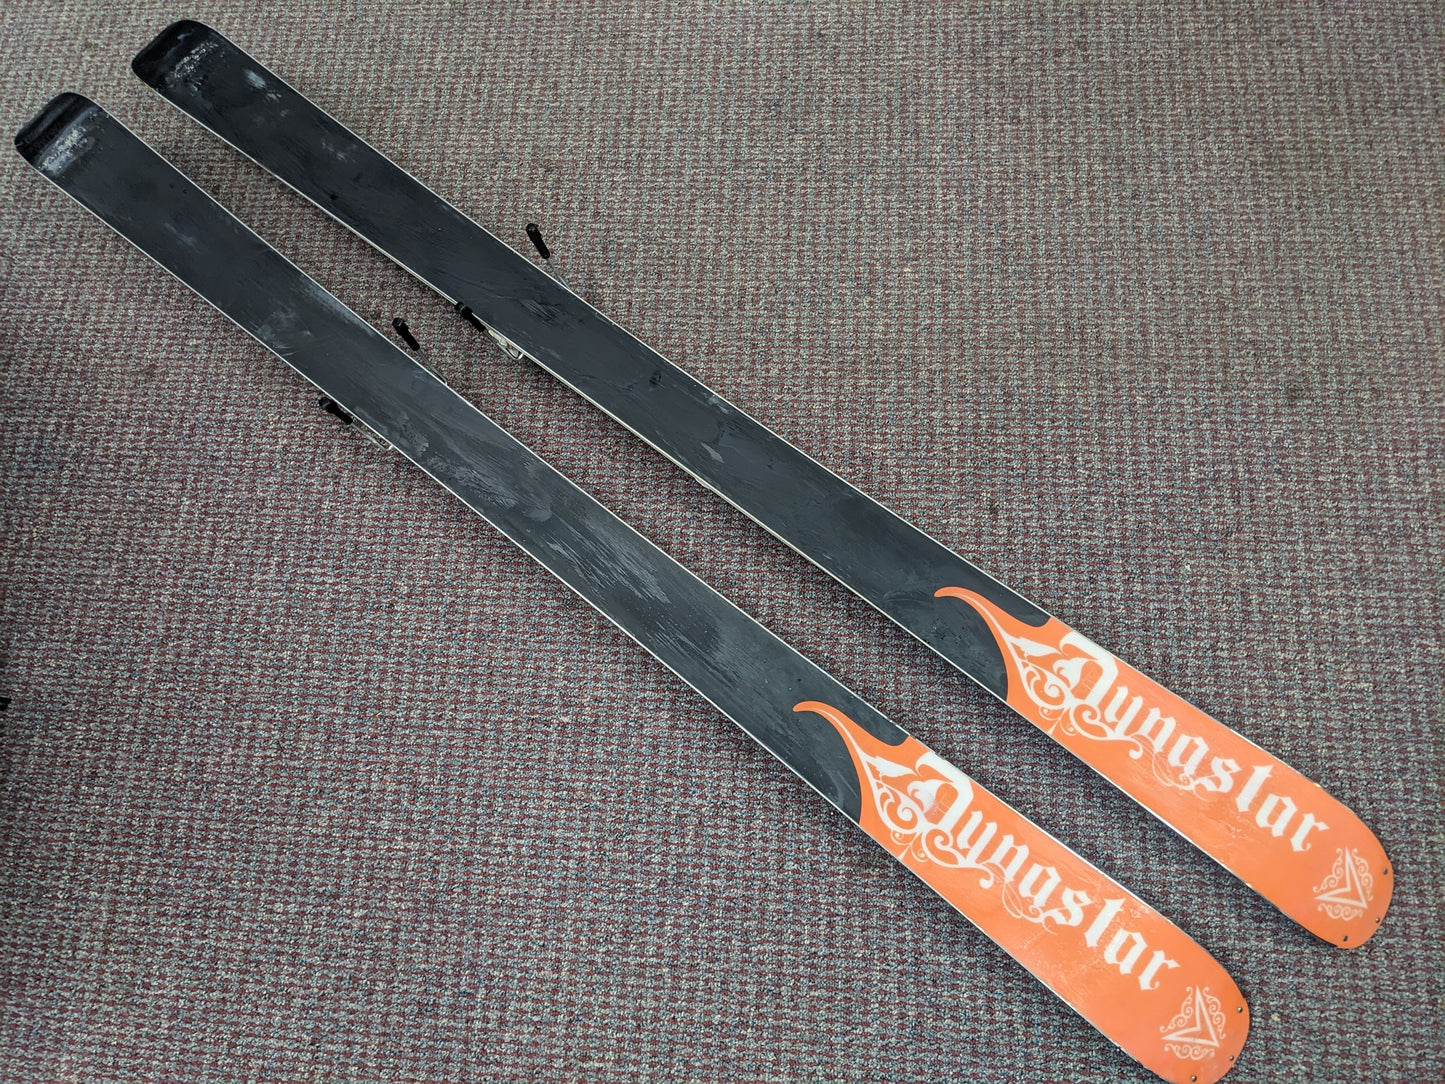 Dynastar Mythic Rider Skis w/Rossignol Bindings Size 172 cm Color Orange Condition Used